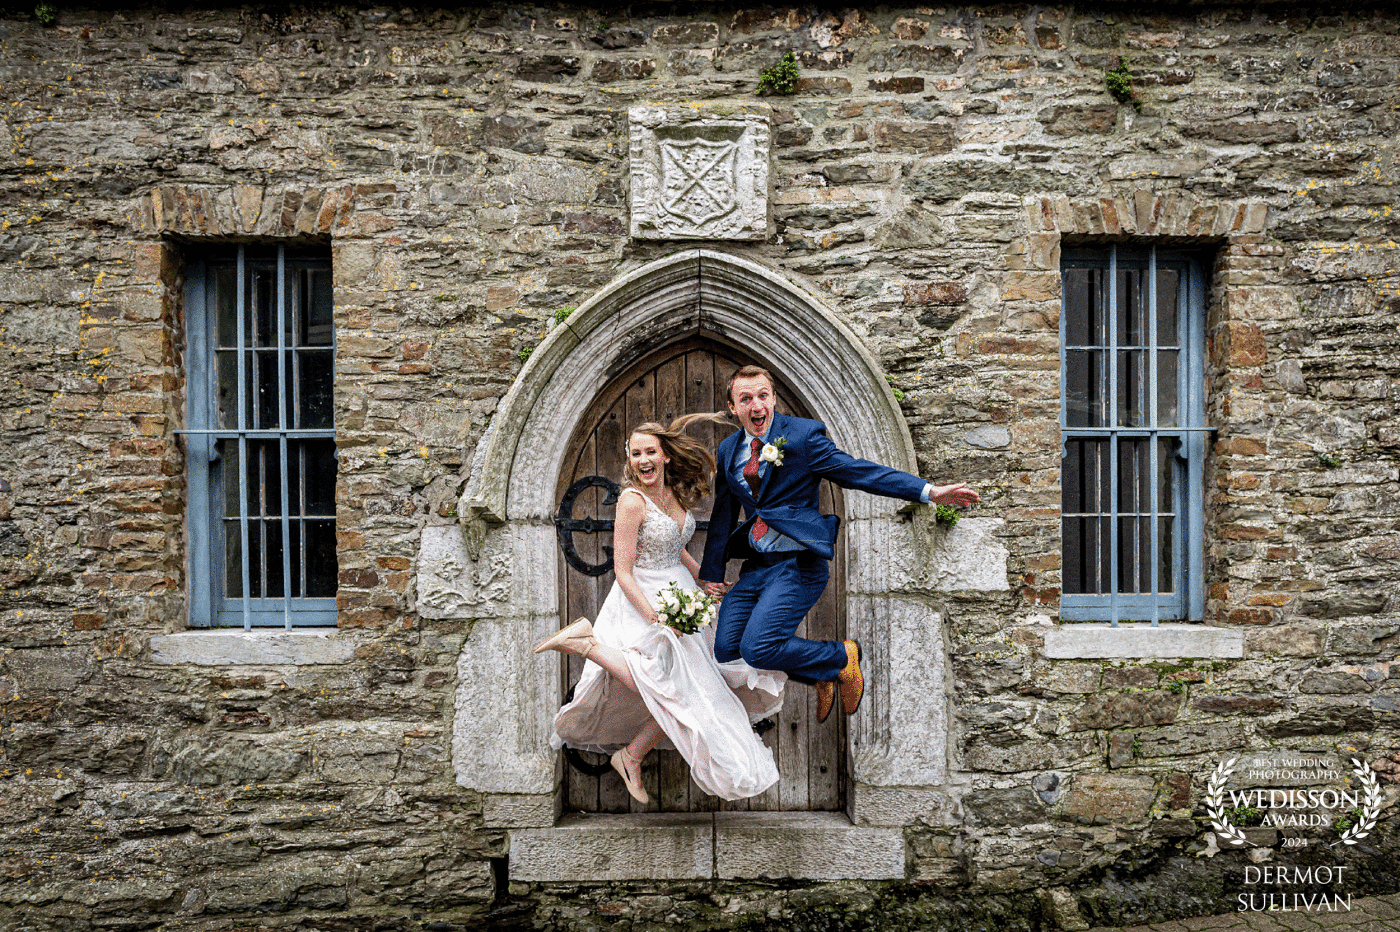 This crazy couple volunteered to jump off the raised doorstep of this Church in Kinsale, Ireland. All I did was press the shutter!